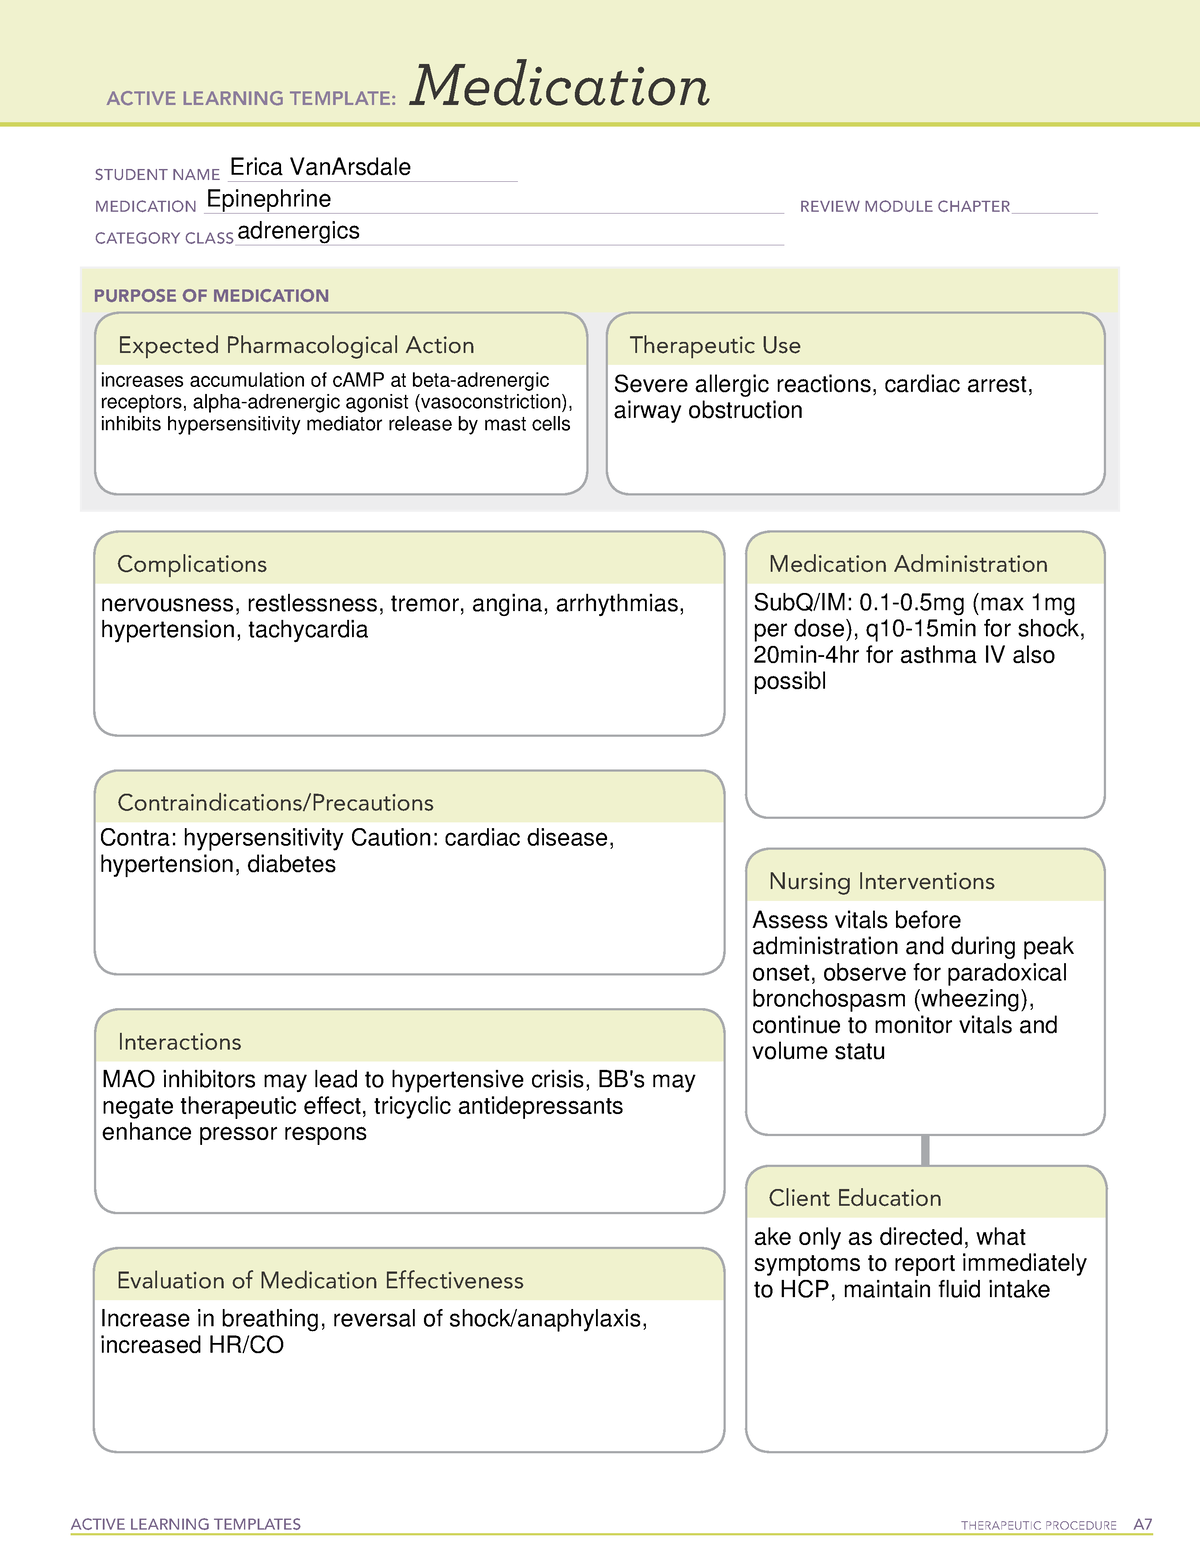 Epinephrine and meds ACTIVE LEARNING TEMPLATES THERAPEUTIC PROCEDURE